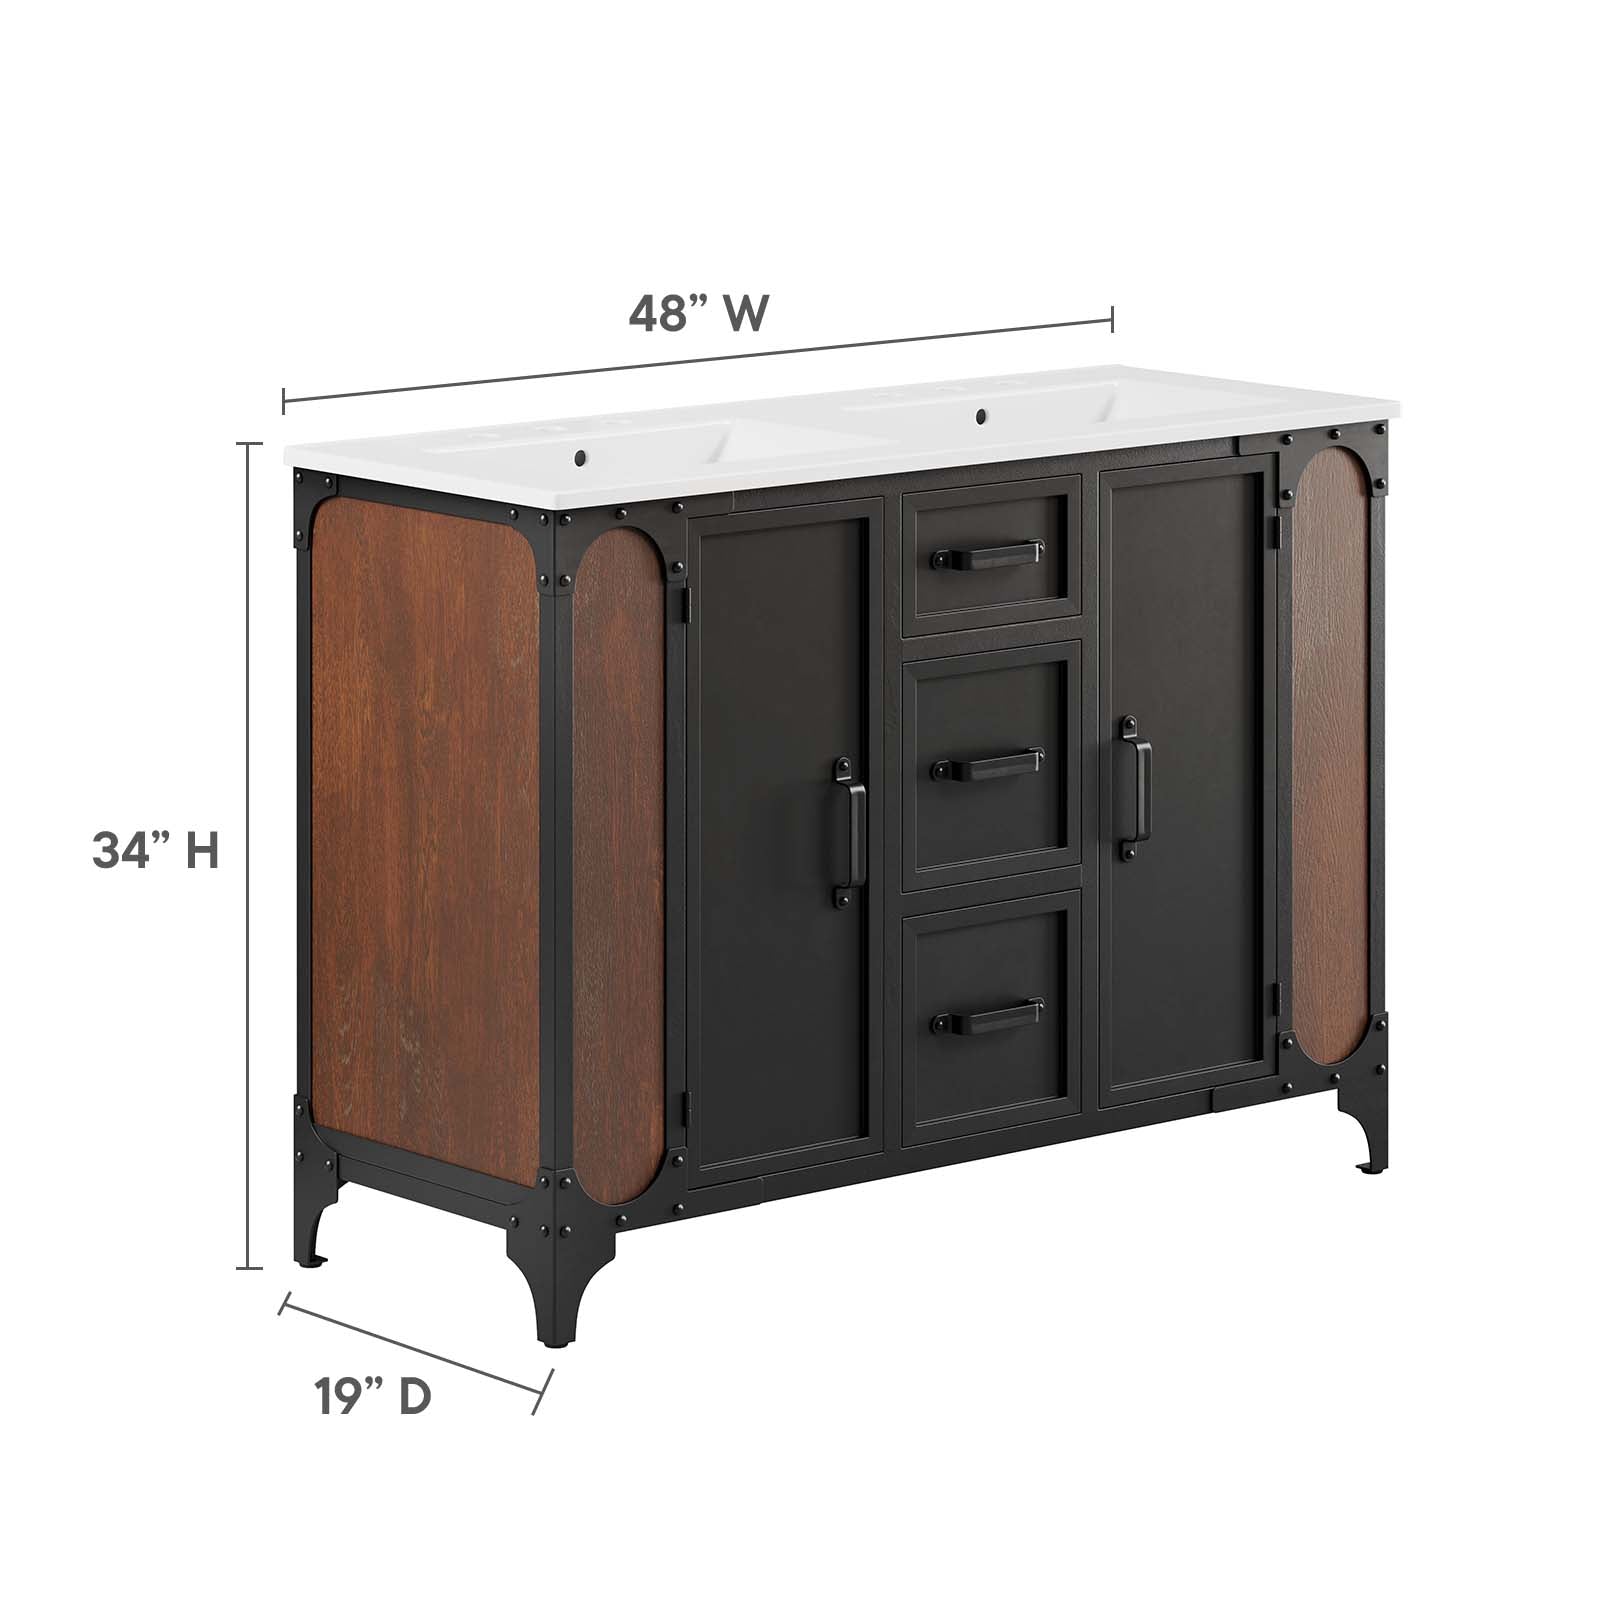 Steamforge 48" Double Sink Bathroom Vanity By Modway - EEI-6421 | Bathroom Accessories | Modway - 6